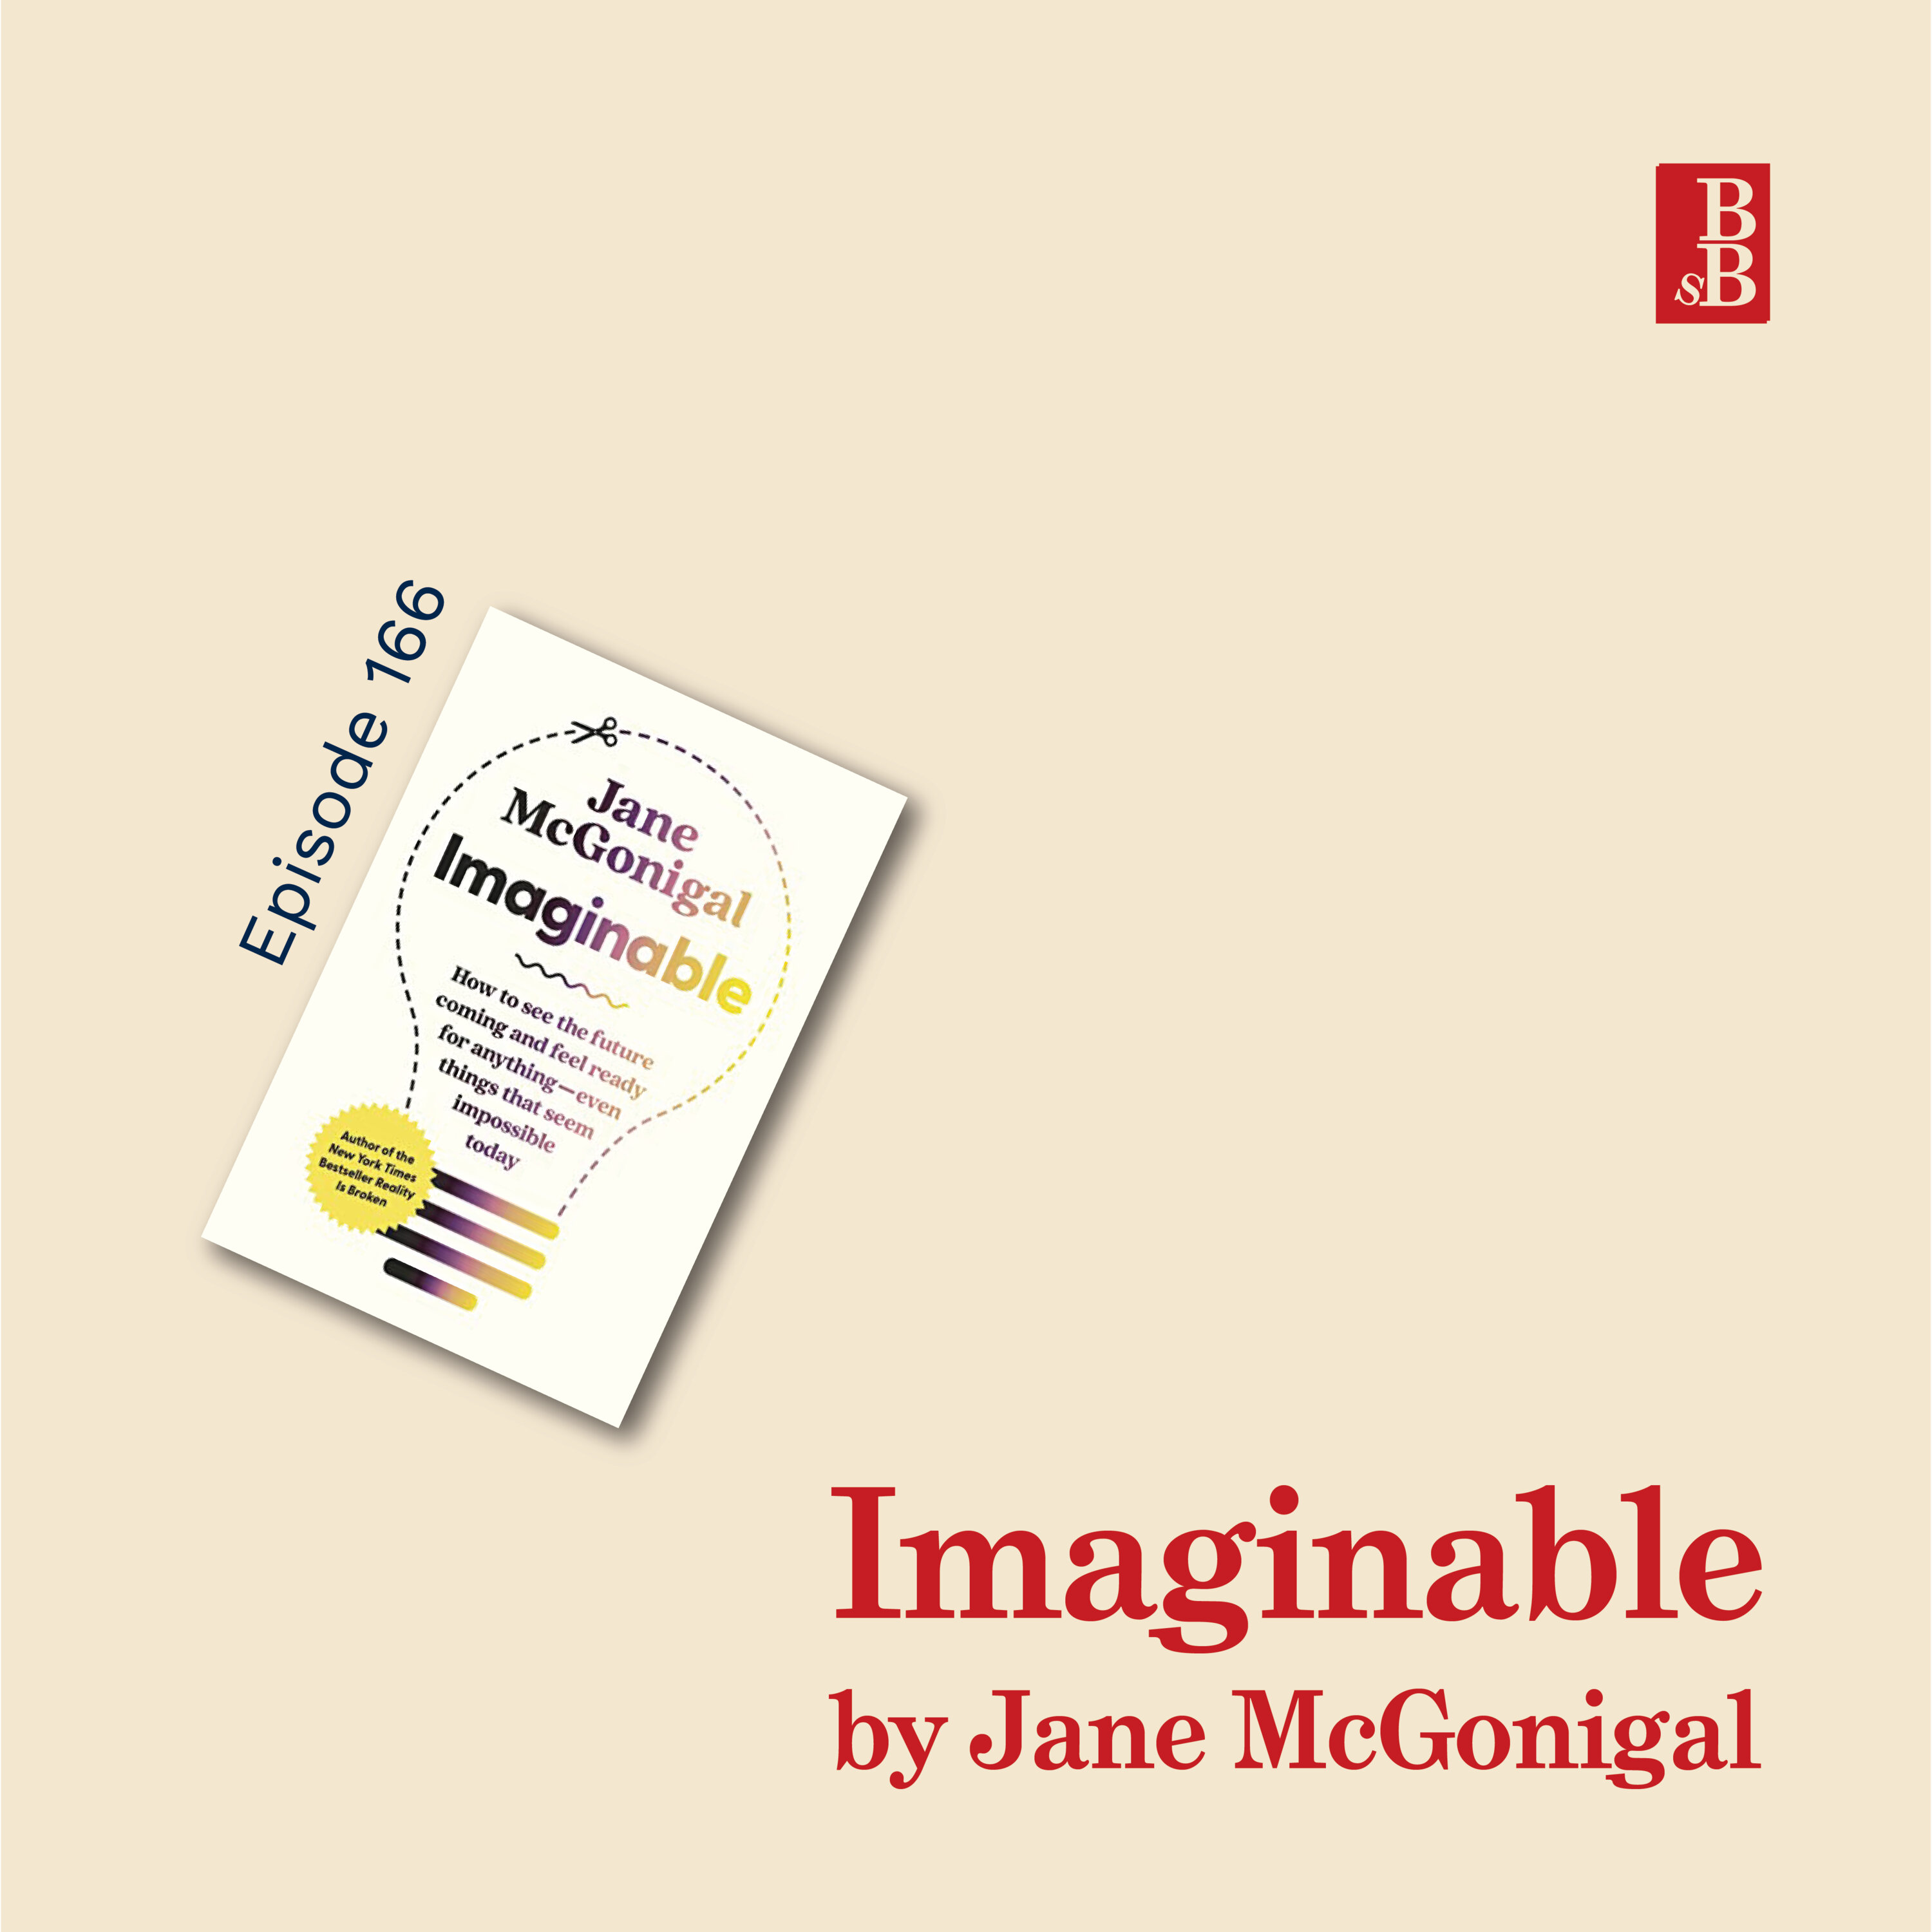 Imaginable by Jane McGonigal: why you need to take a step into an unthinkable future Image